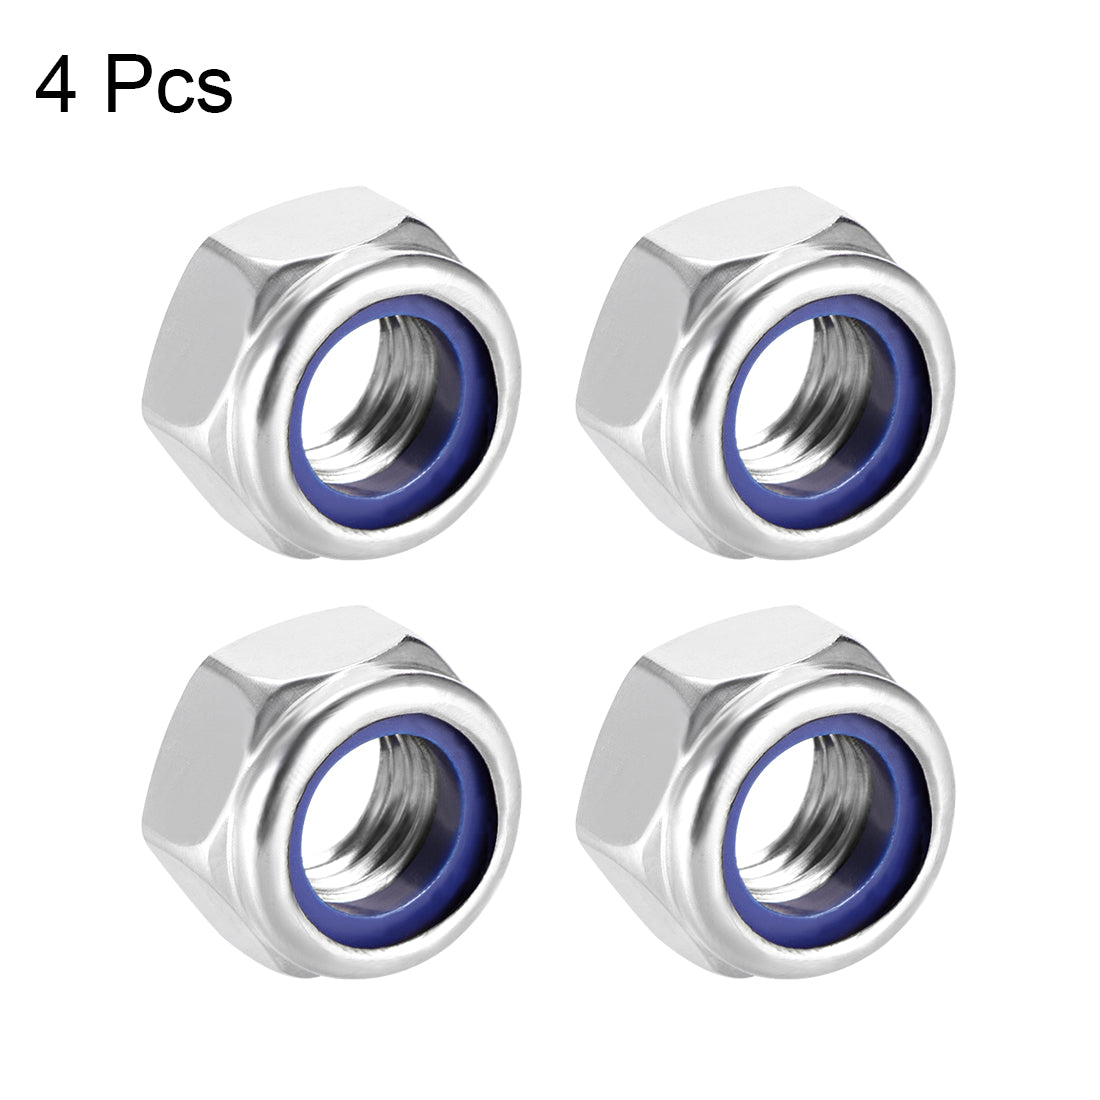 uxcell Uxcell M12x1.75mm Hex Lock Nuts Stainless Steel Nylon Insert Self-Lock Nut, 4Pcs Silver